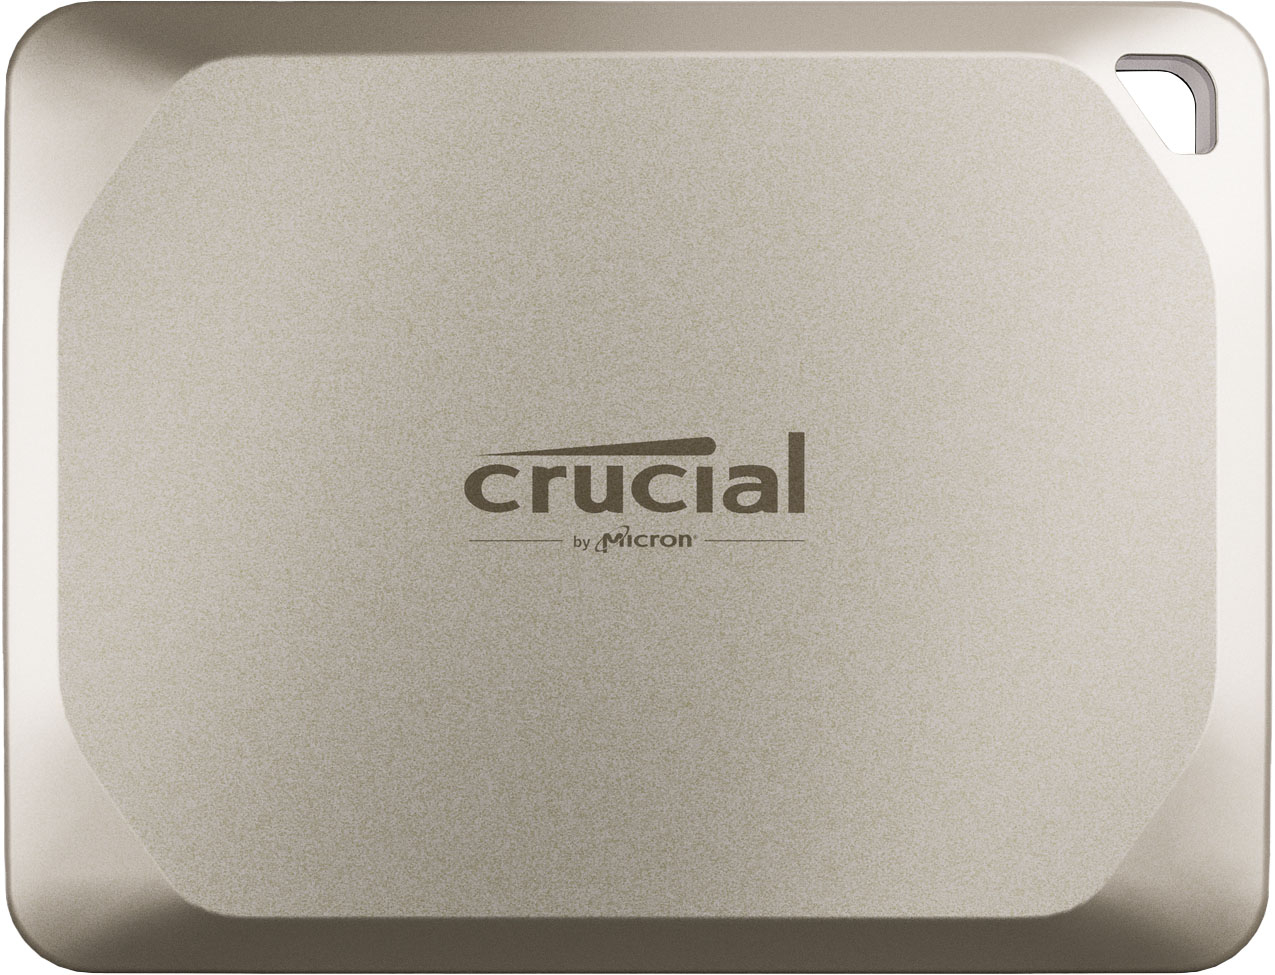 Crucial X9 Pro external SSD review: Fast, good-looking, easy on